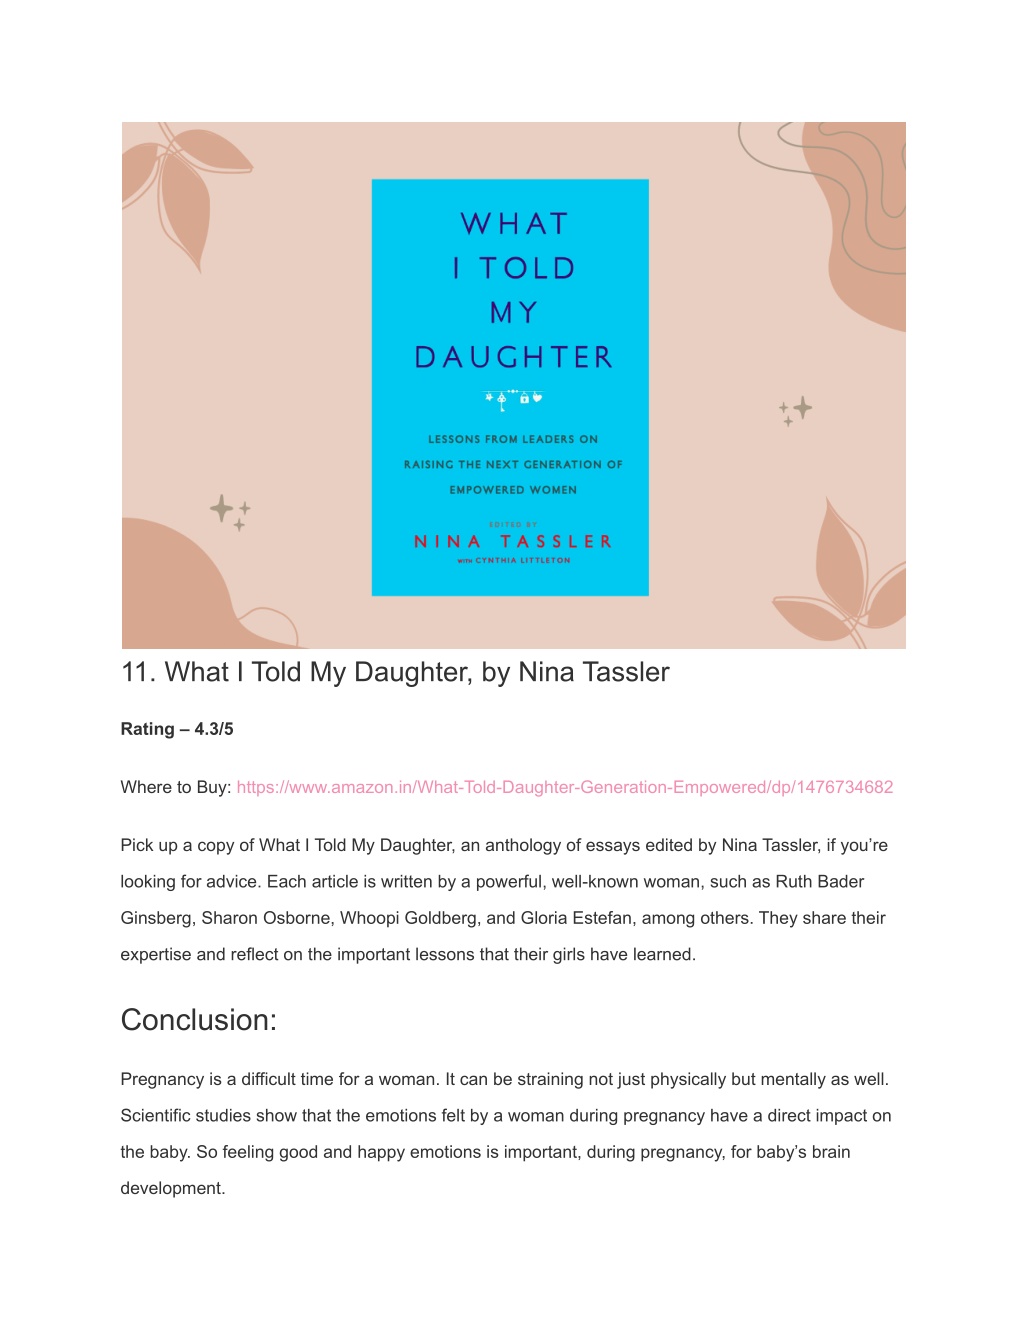 What I Told My Daughter by Nina Tassler